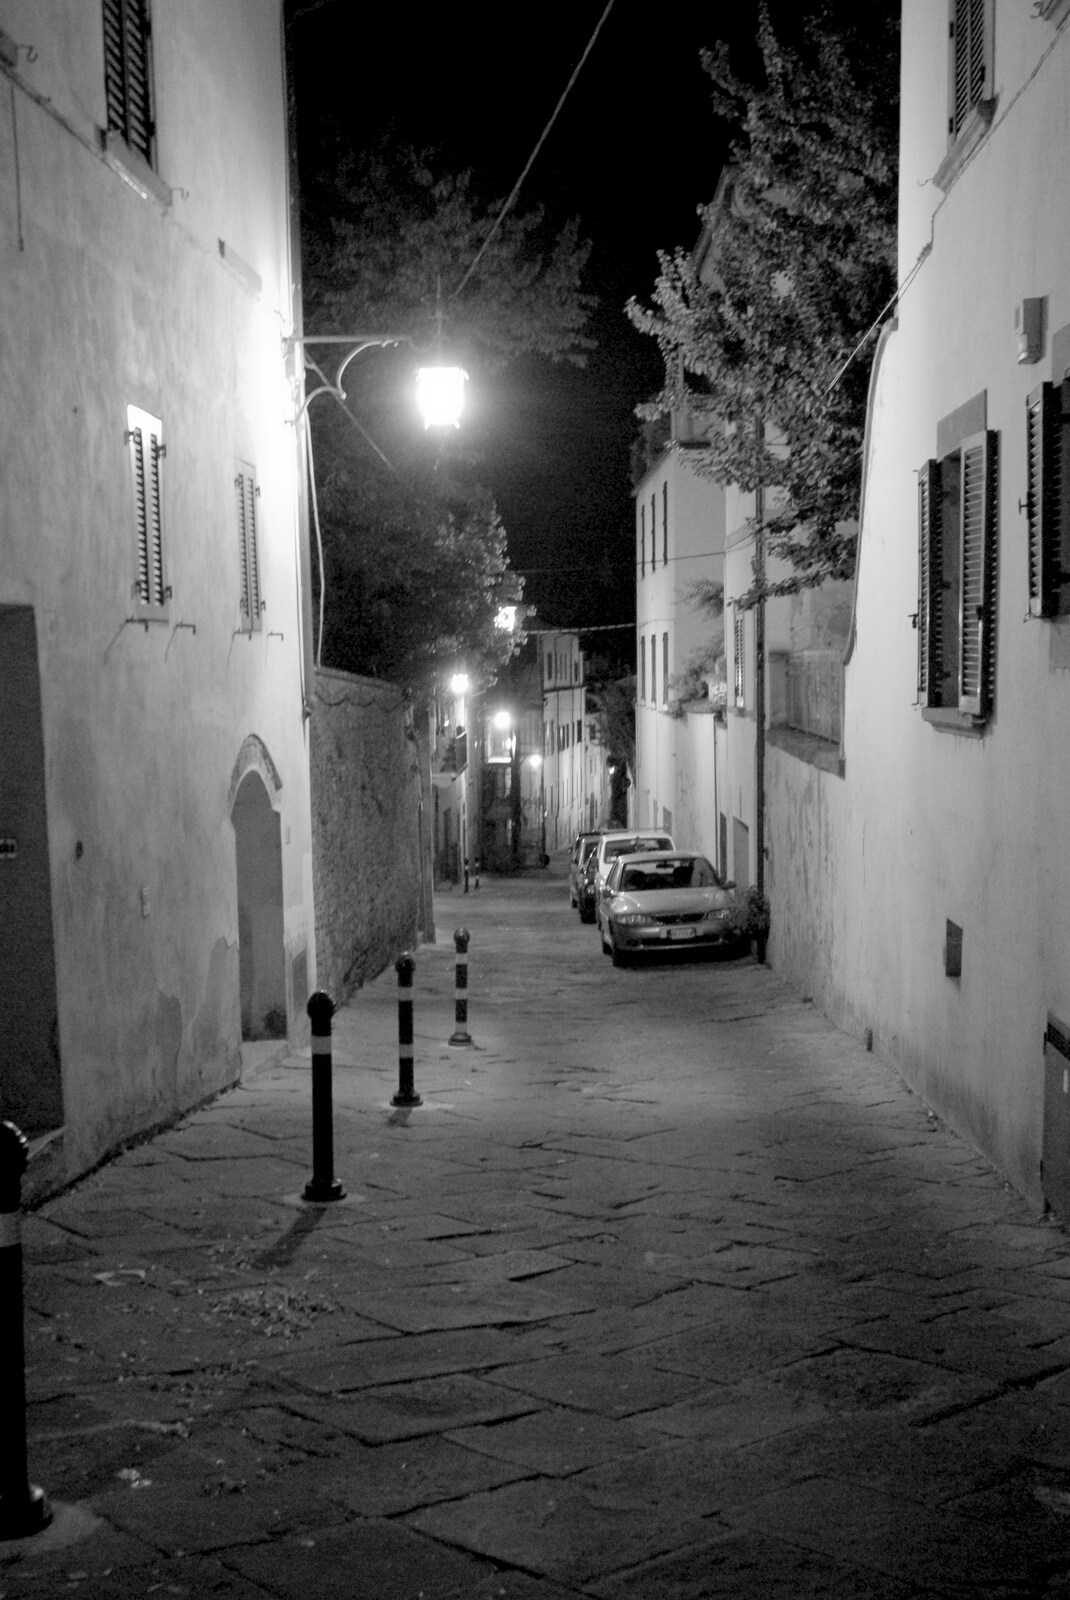 Another back alley from Tenuta Il Palazzo in Arezzo, Tuscany, Italy - 22nd July 2008